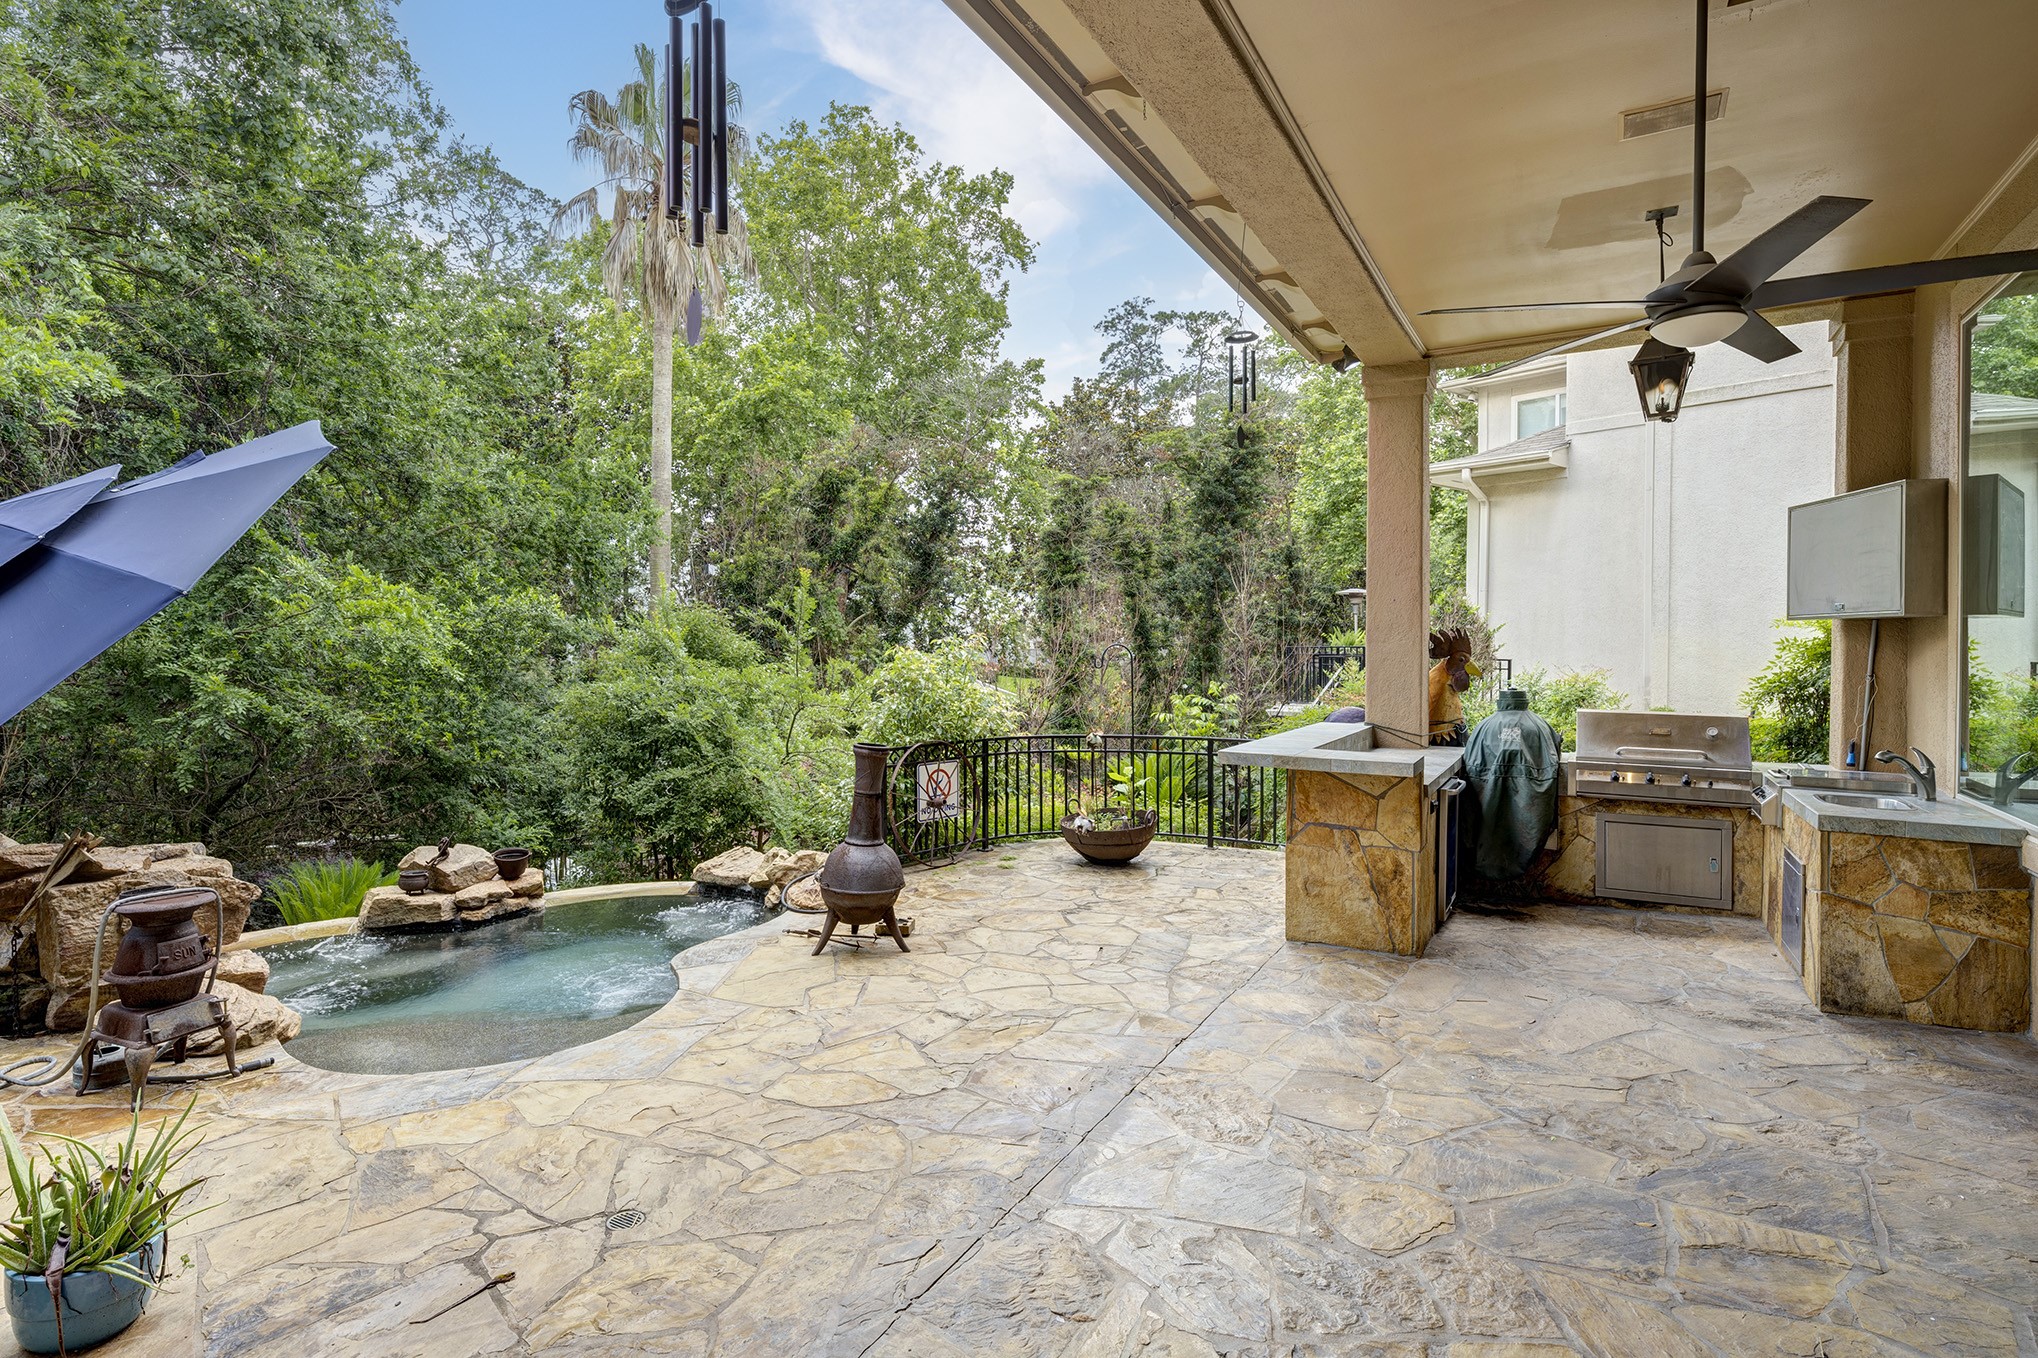 Backyard oasis with plunge pool / spa and outdoor kitchen.